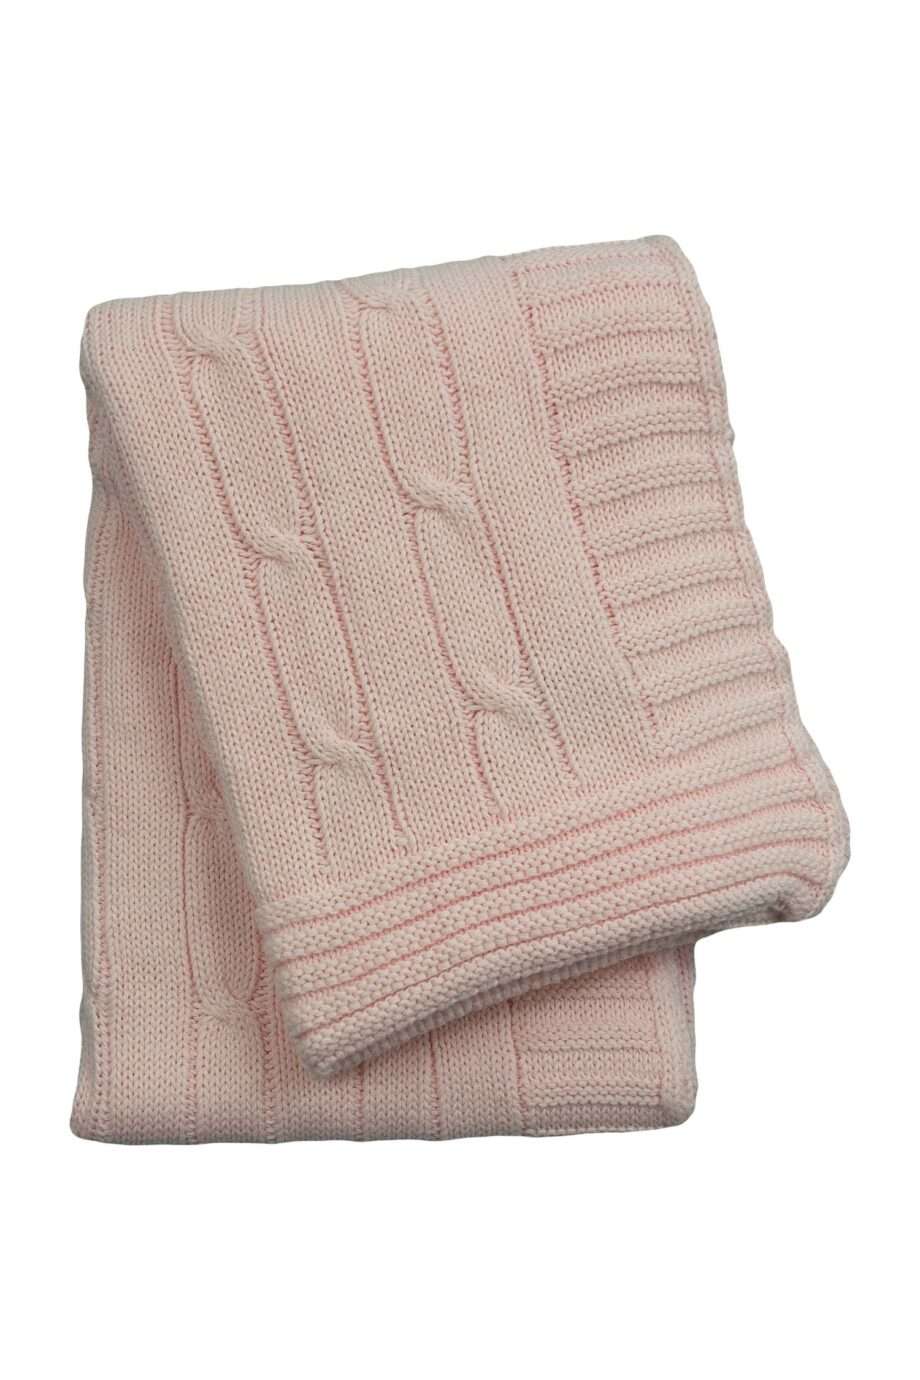 twist baby pink knitted cotton little blanket small